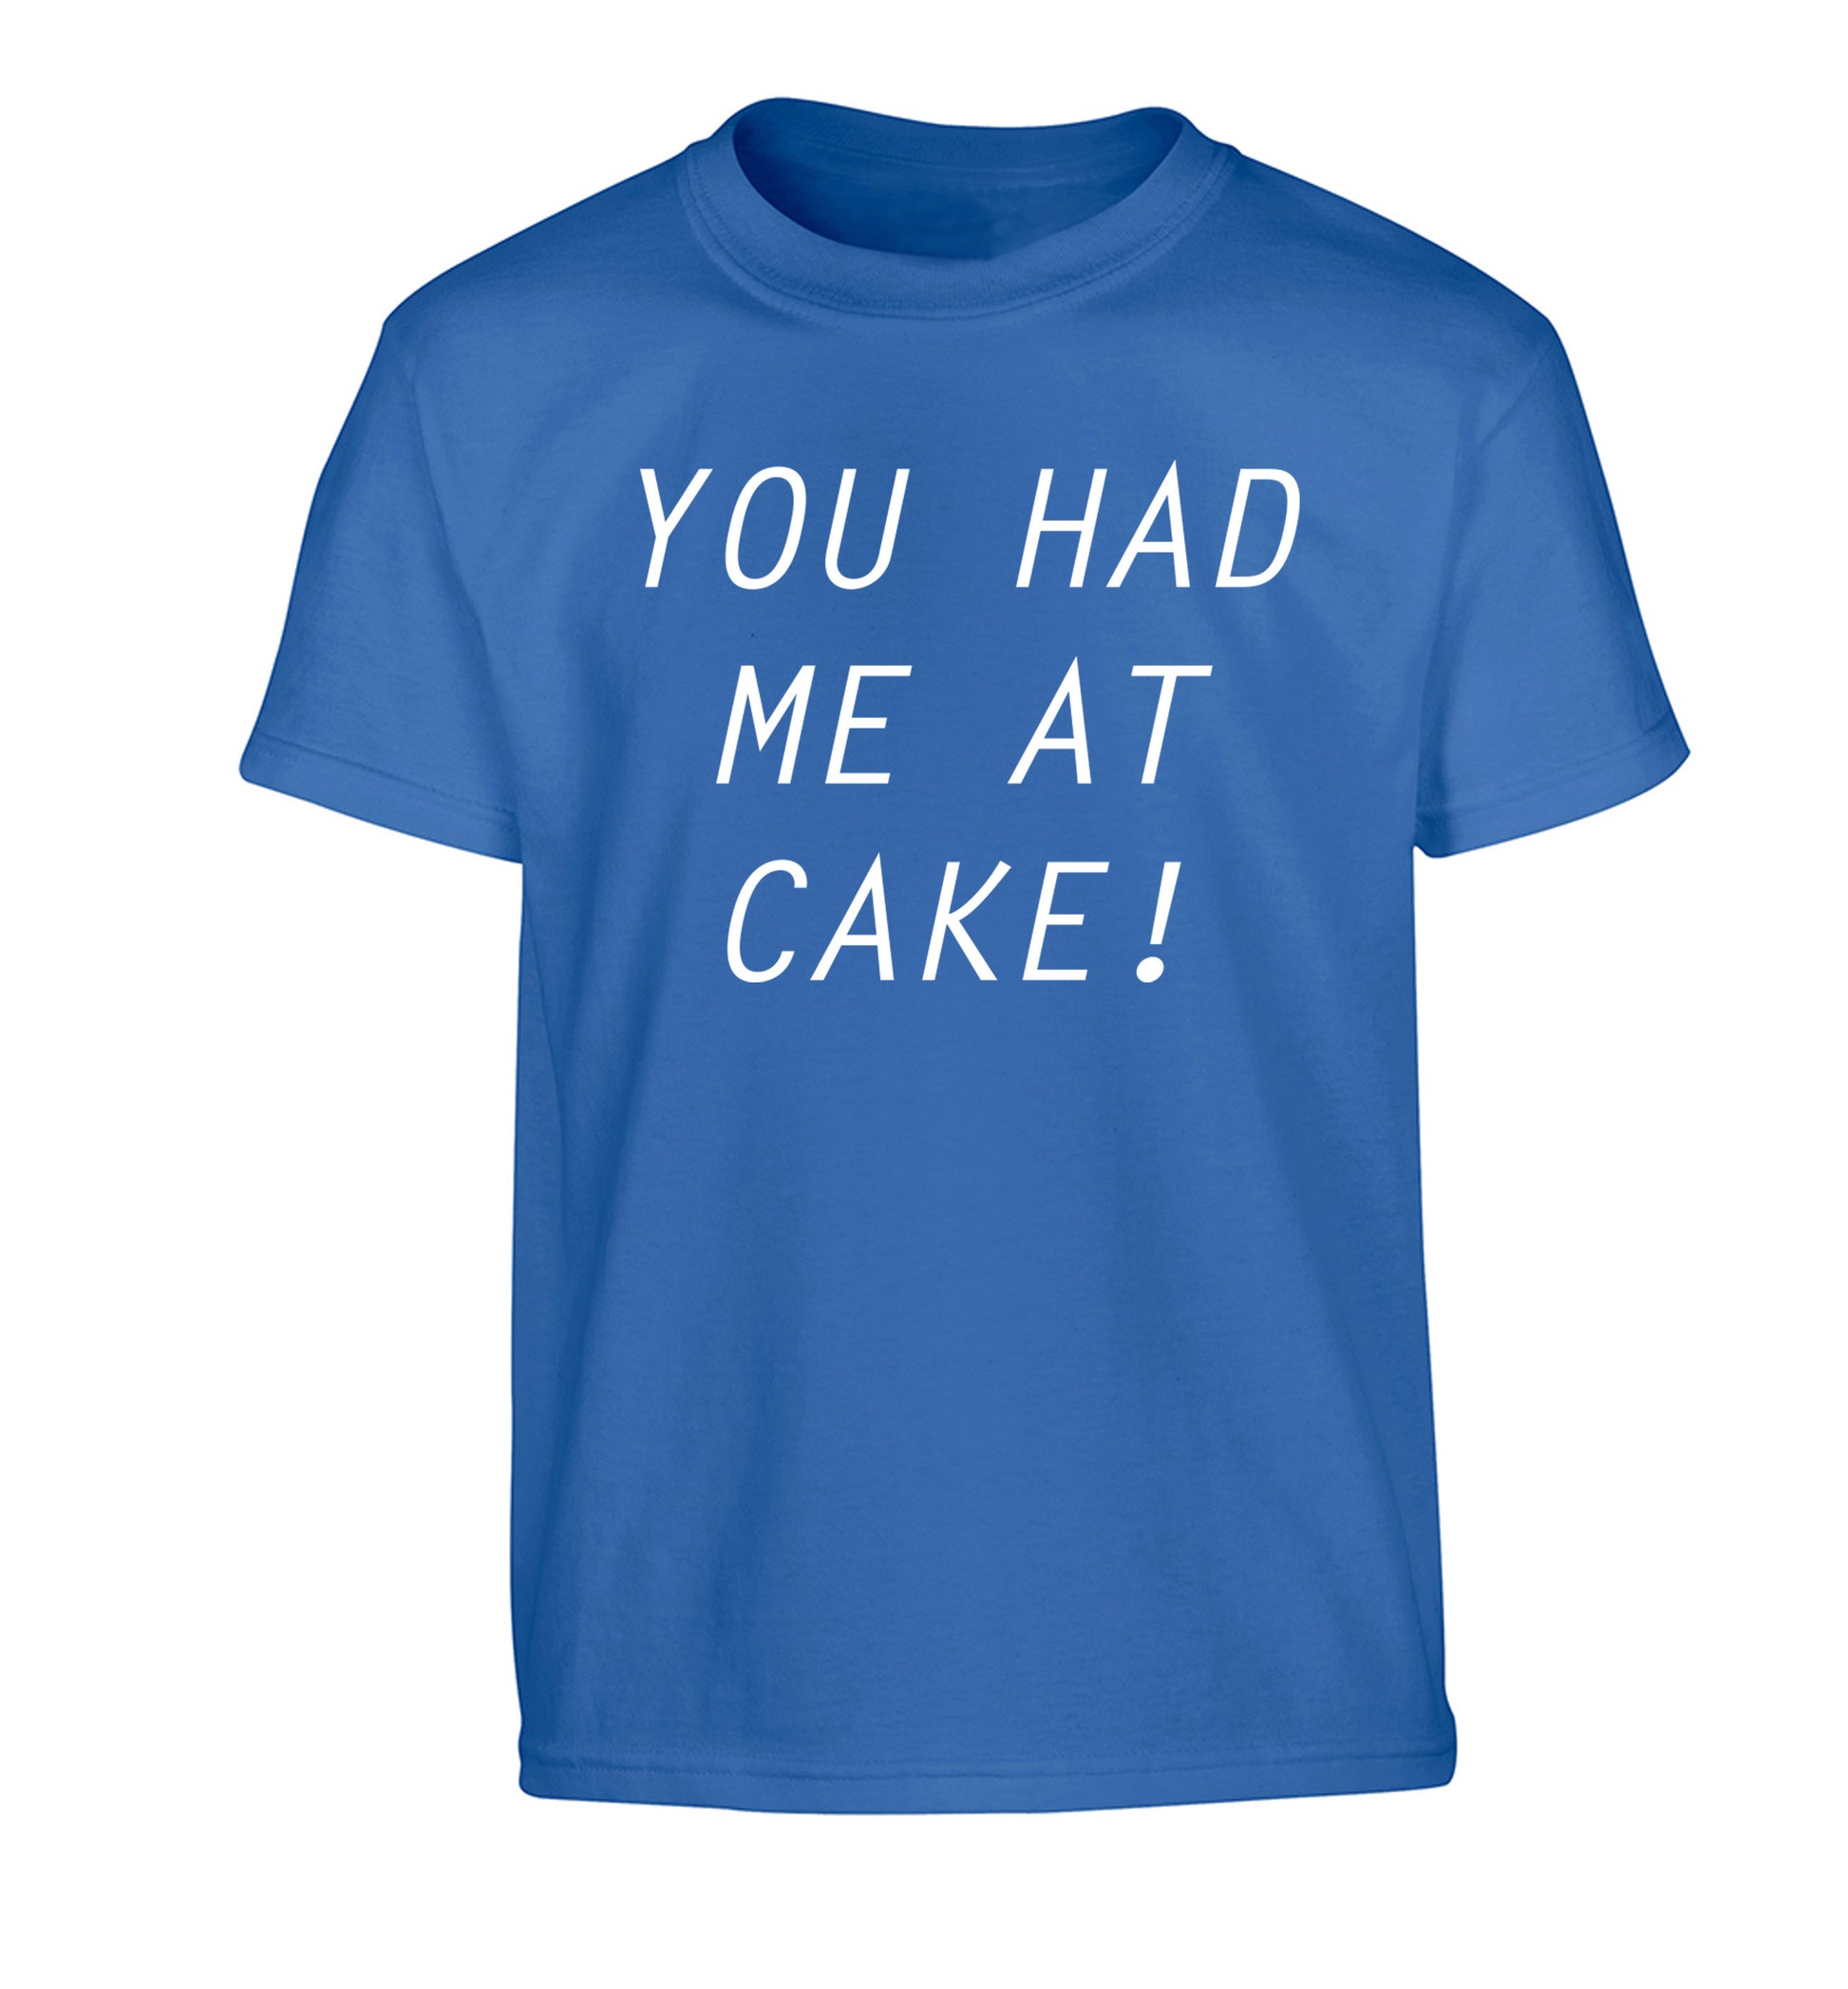 You had me at cake Children's blue Tshirt 12-14 Years